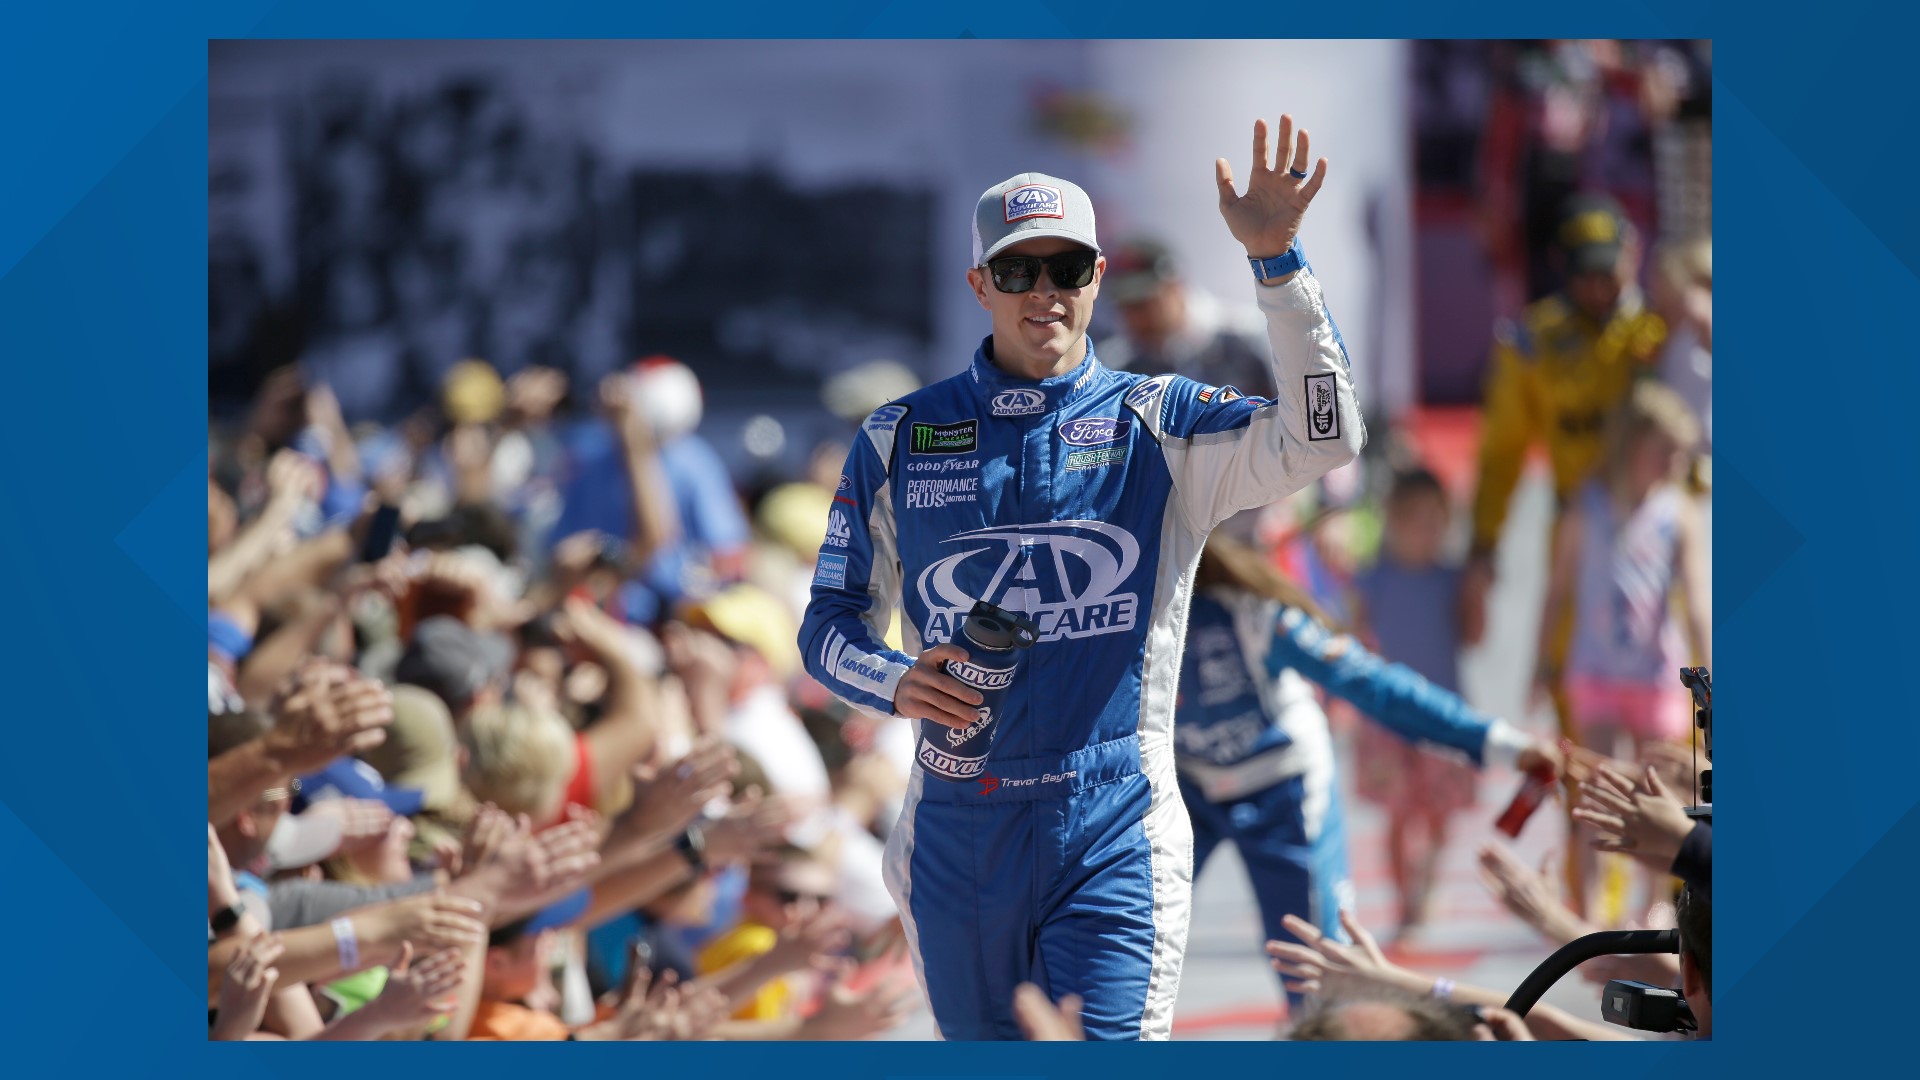 Having not raced in the Cup series since 2018, he didn't know if he'd get another shot. He's grateful he did. Bayne returns to the  Xfinity Series  on Feb. 26.